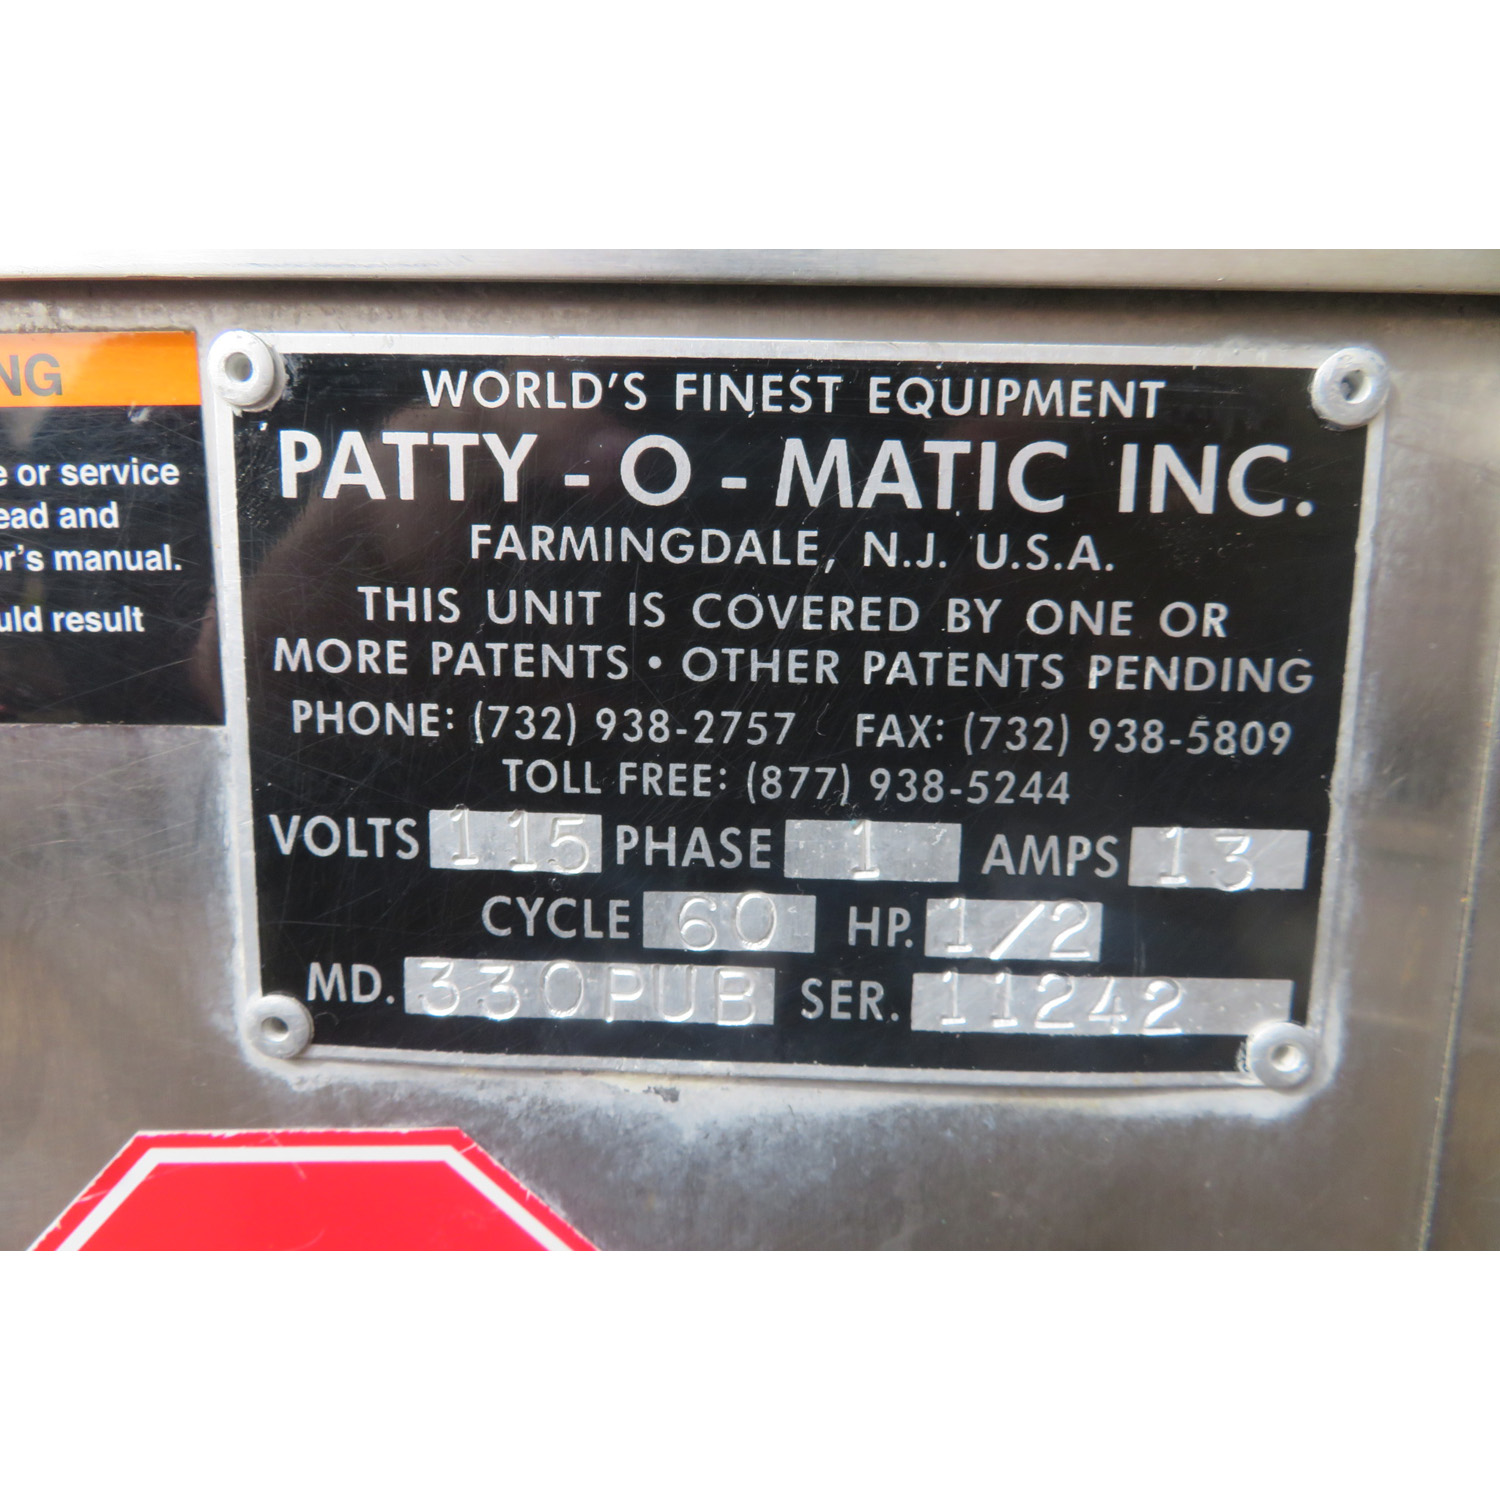 Patty-O-Matic 330PUB Tabletop Patty Maker, Used Great Condition image 4